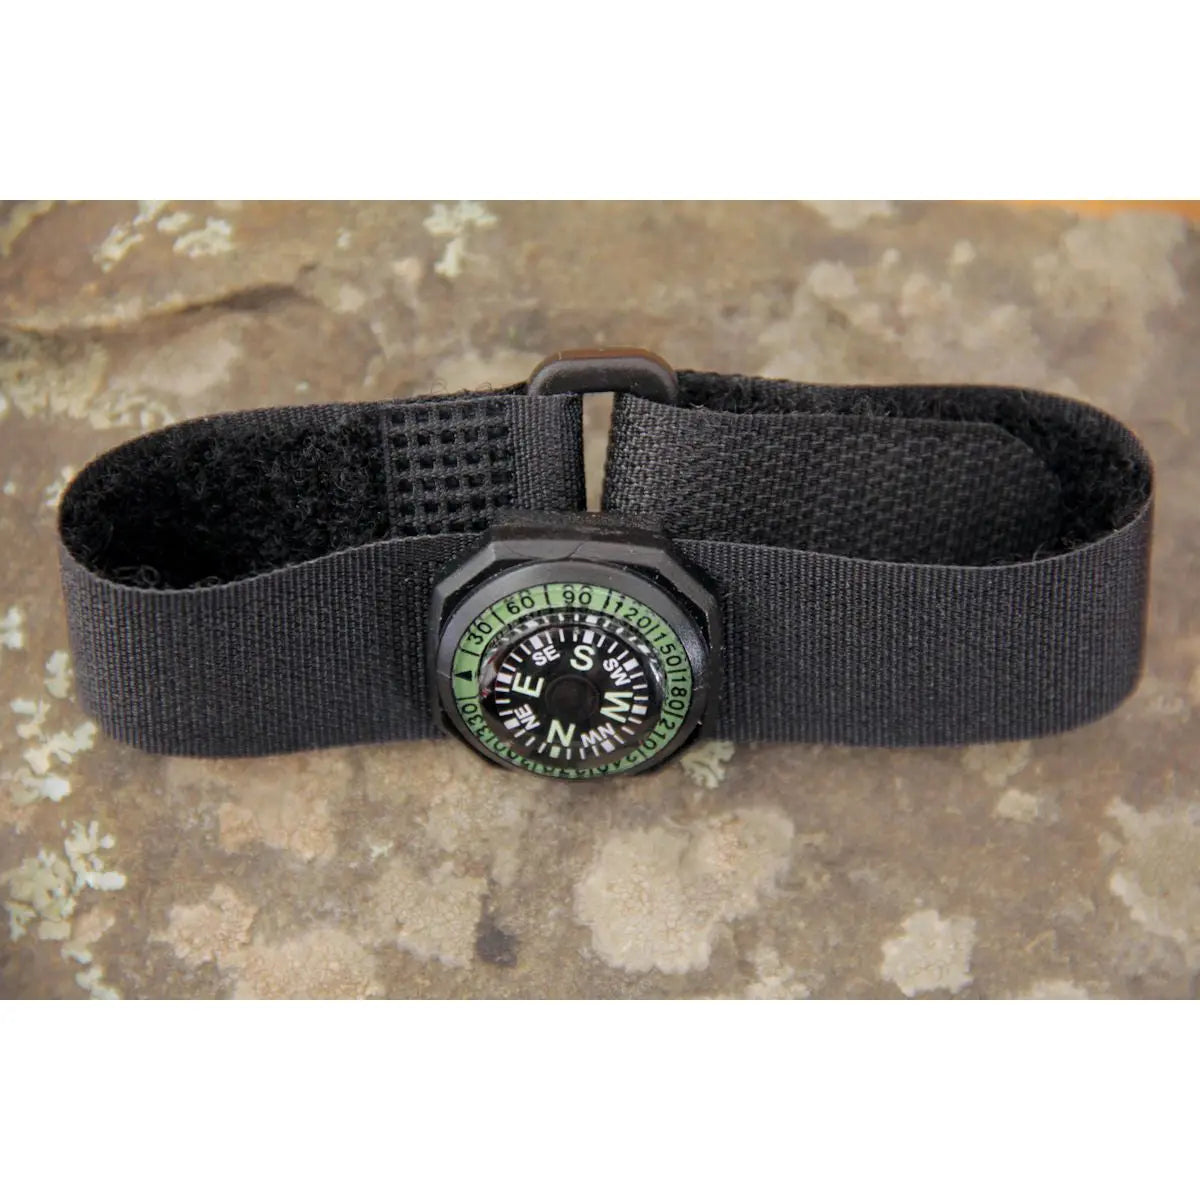 Coghlan's Wrist Compass w/ Strap, Waterproof & Impact Resistant Survival Camping Coghlan's